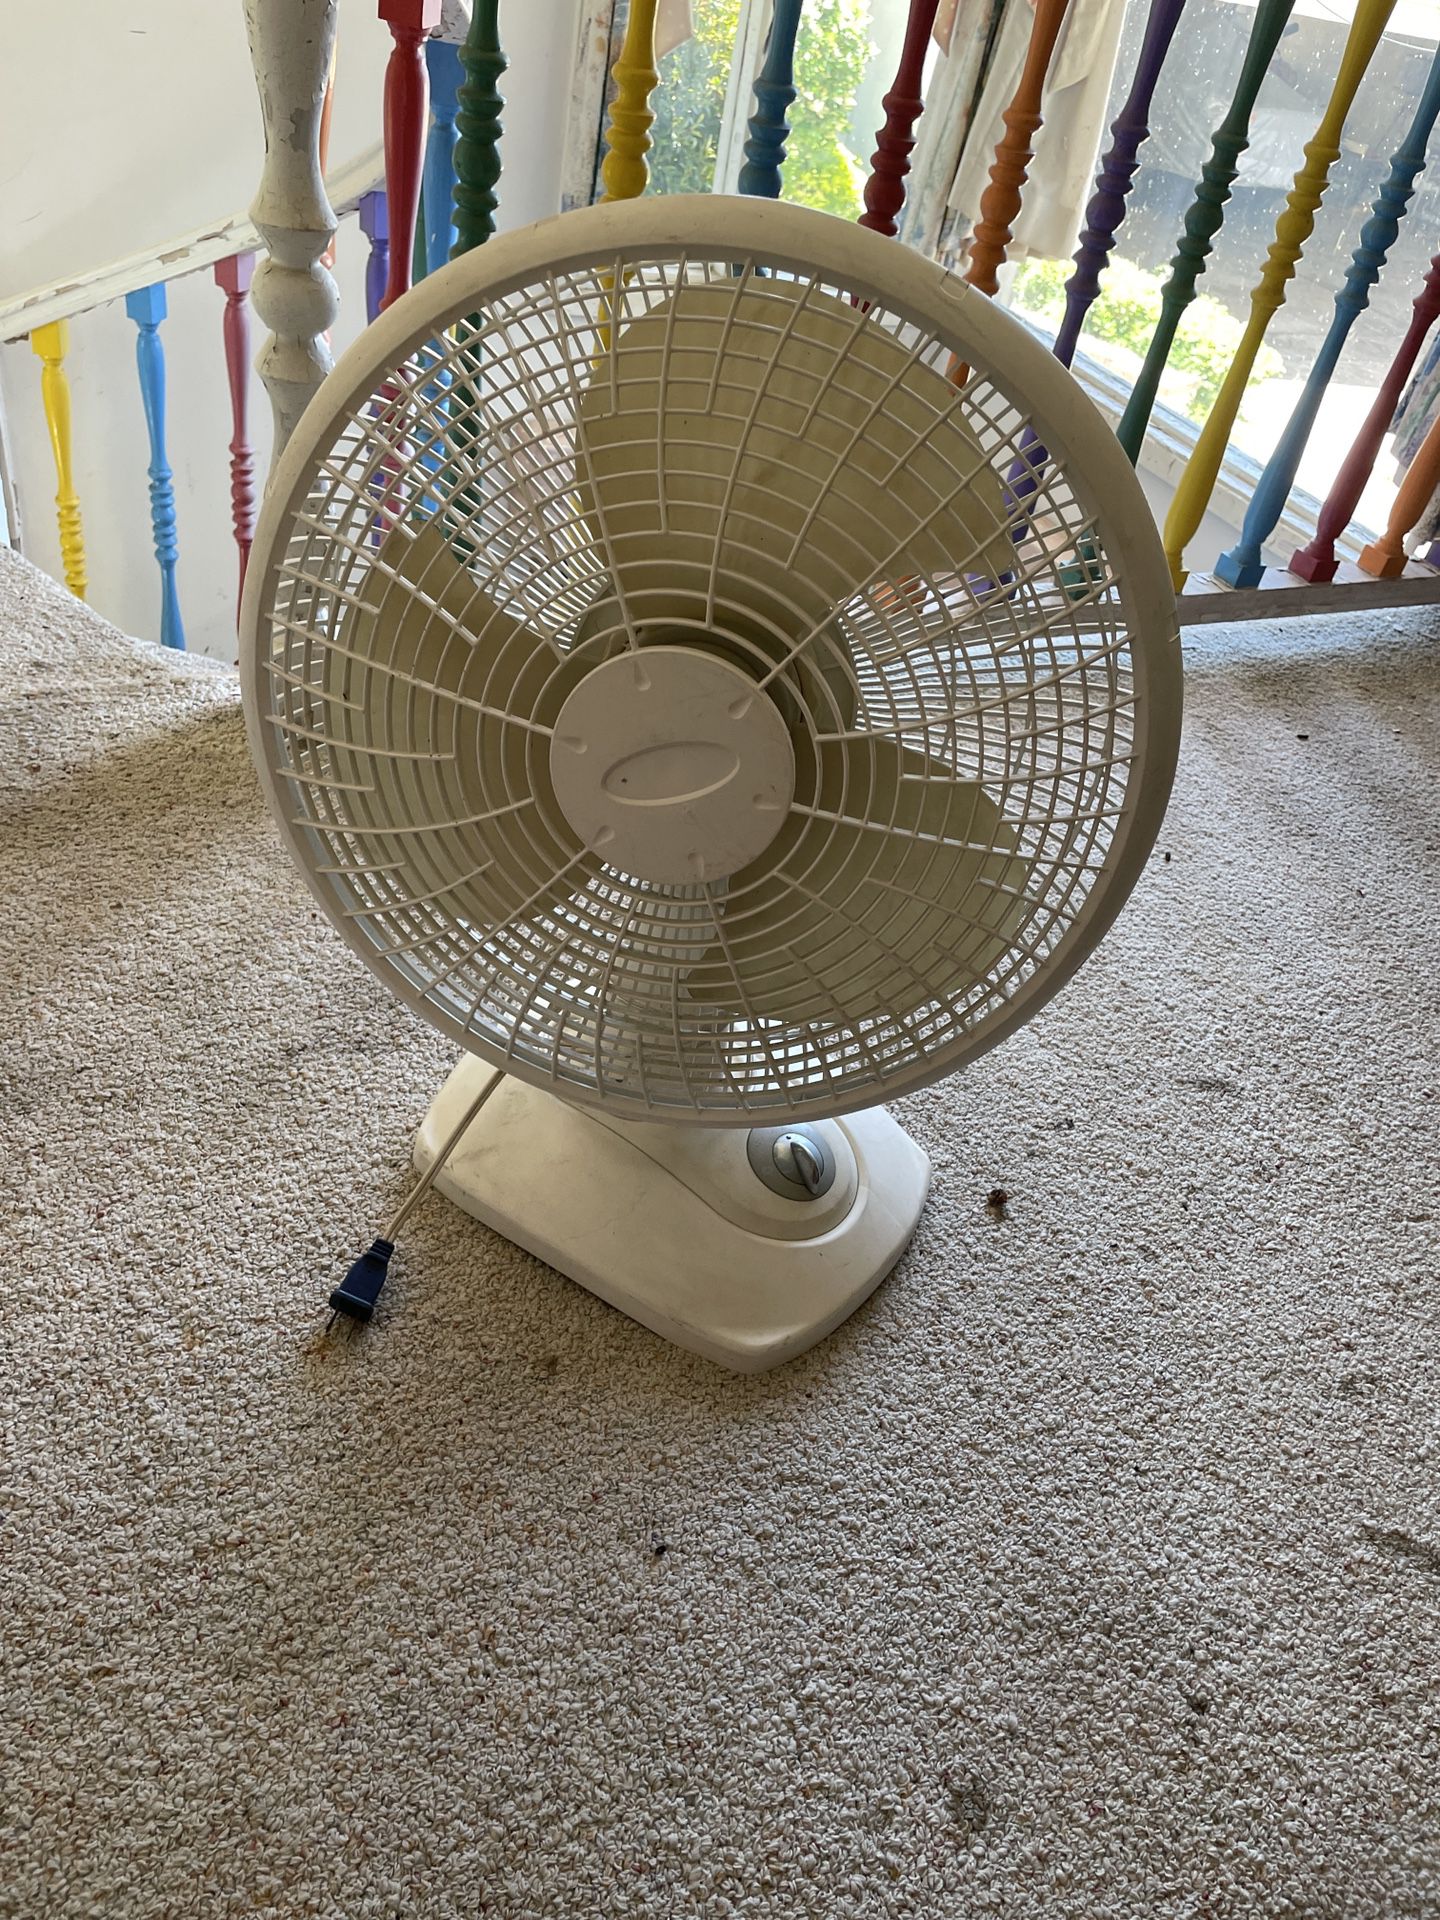 Lasko Over The Counter Fan Tested Works Perfectly when you come ill fully test it for you 